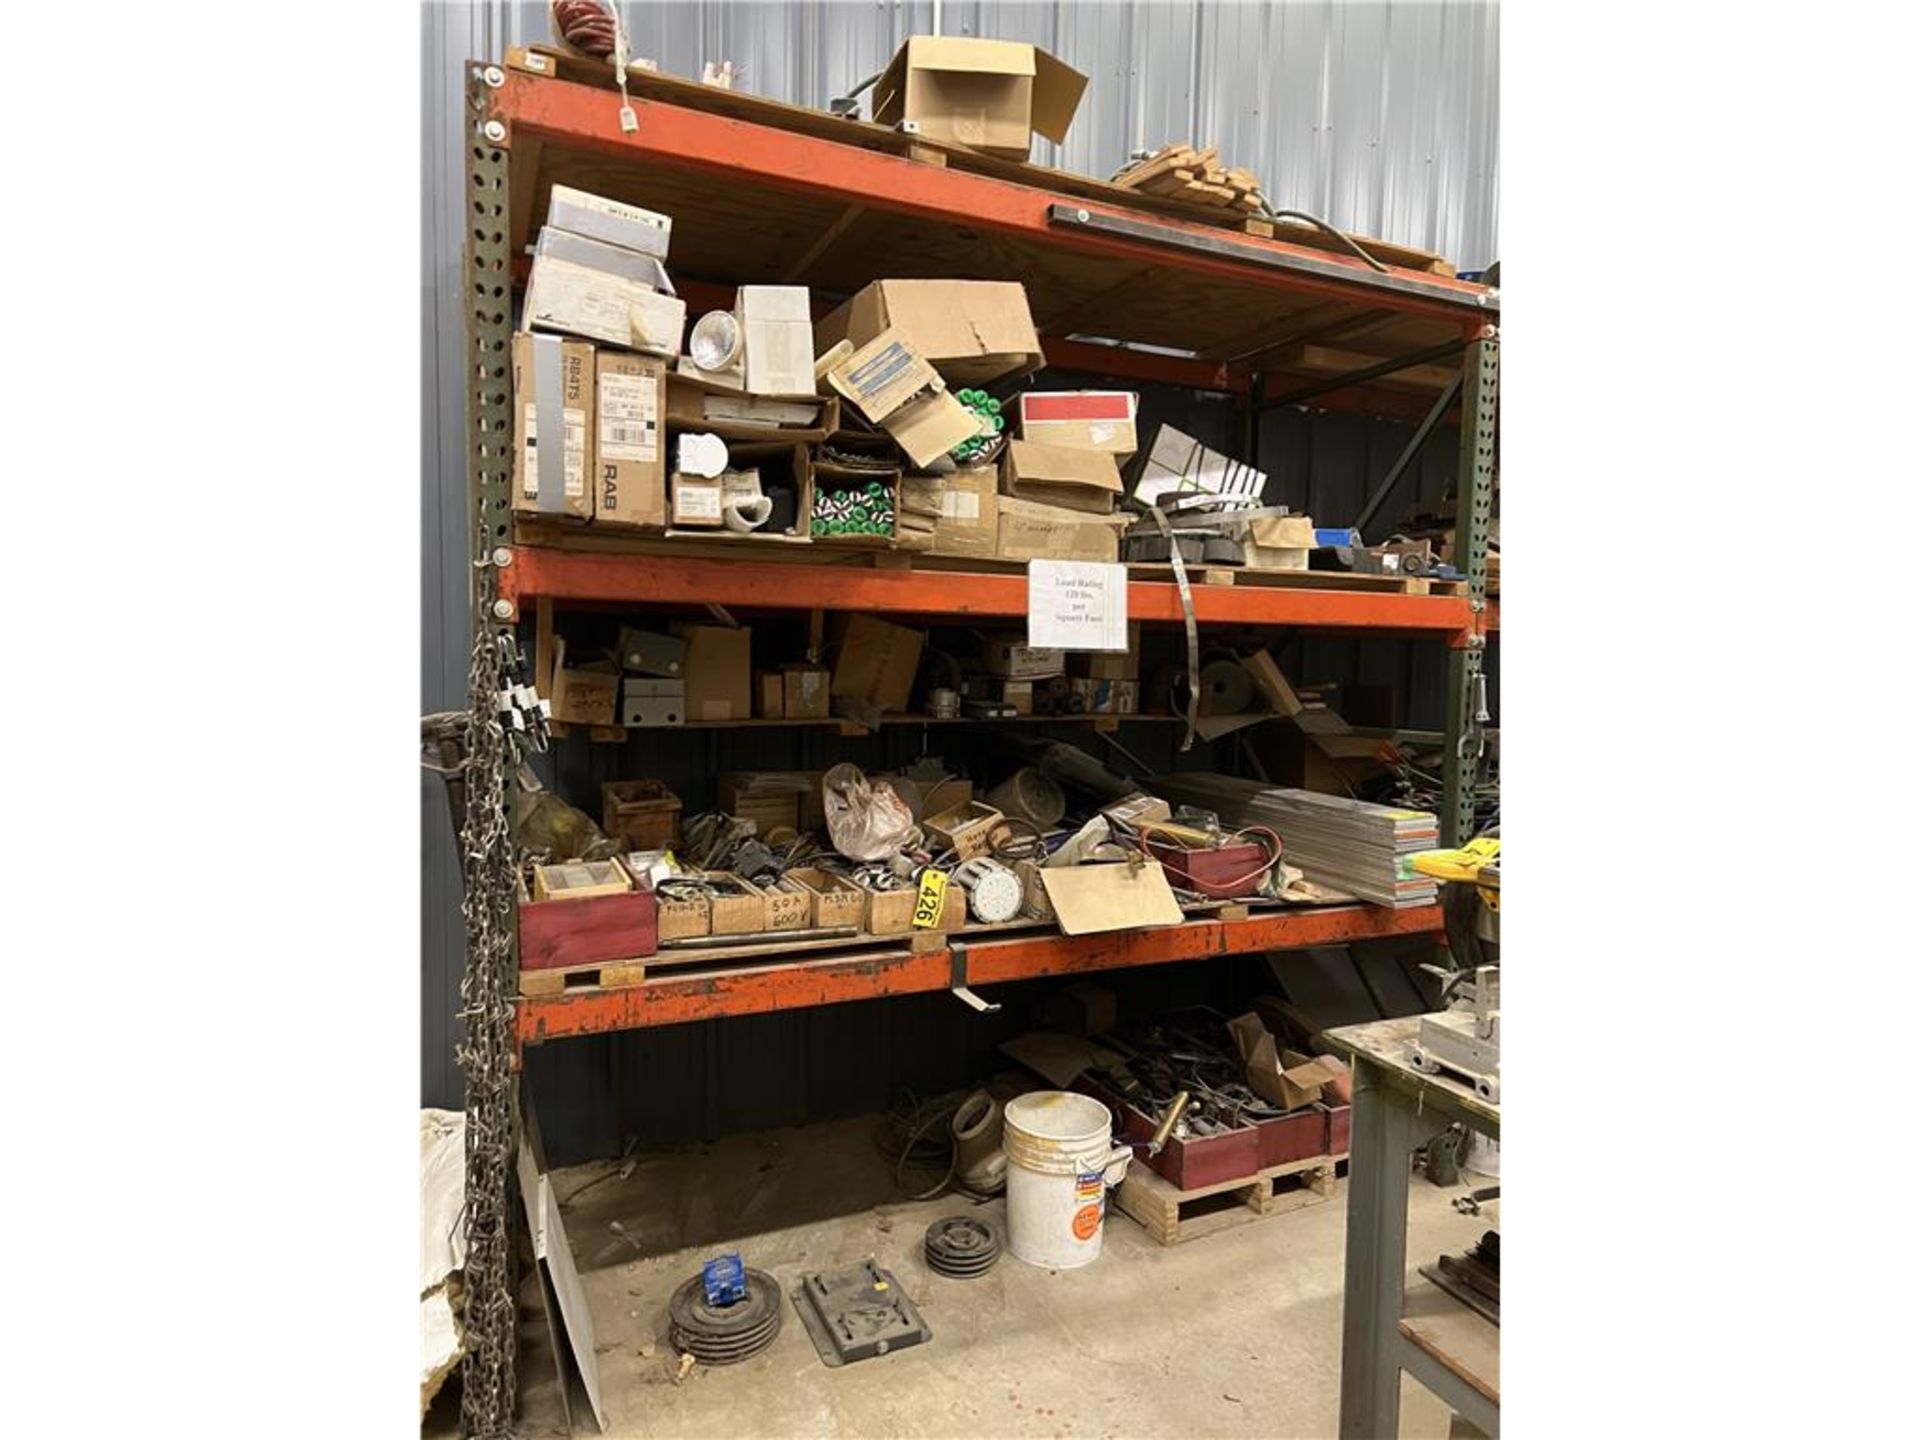 REMAINING CONTENTS ON 4-SHELVES: MISC. LIGHTING, PARTS & HARDWARE